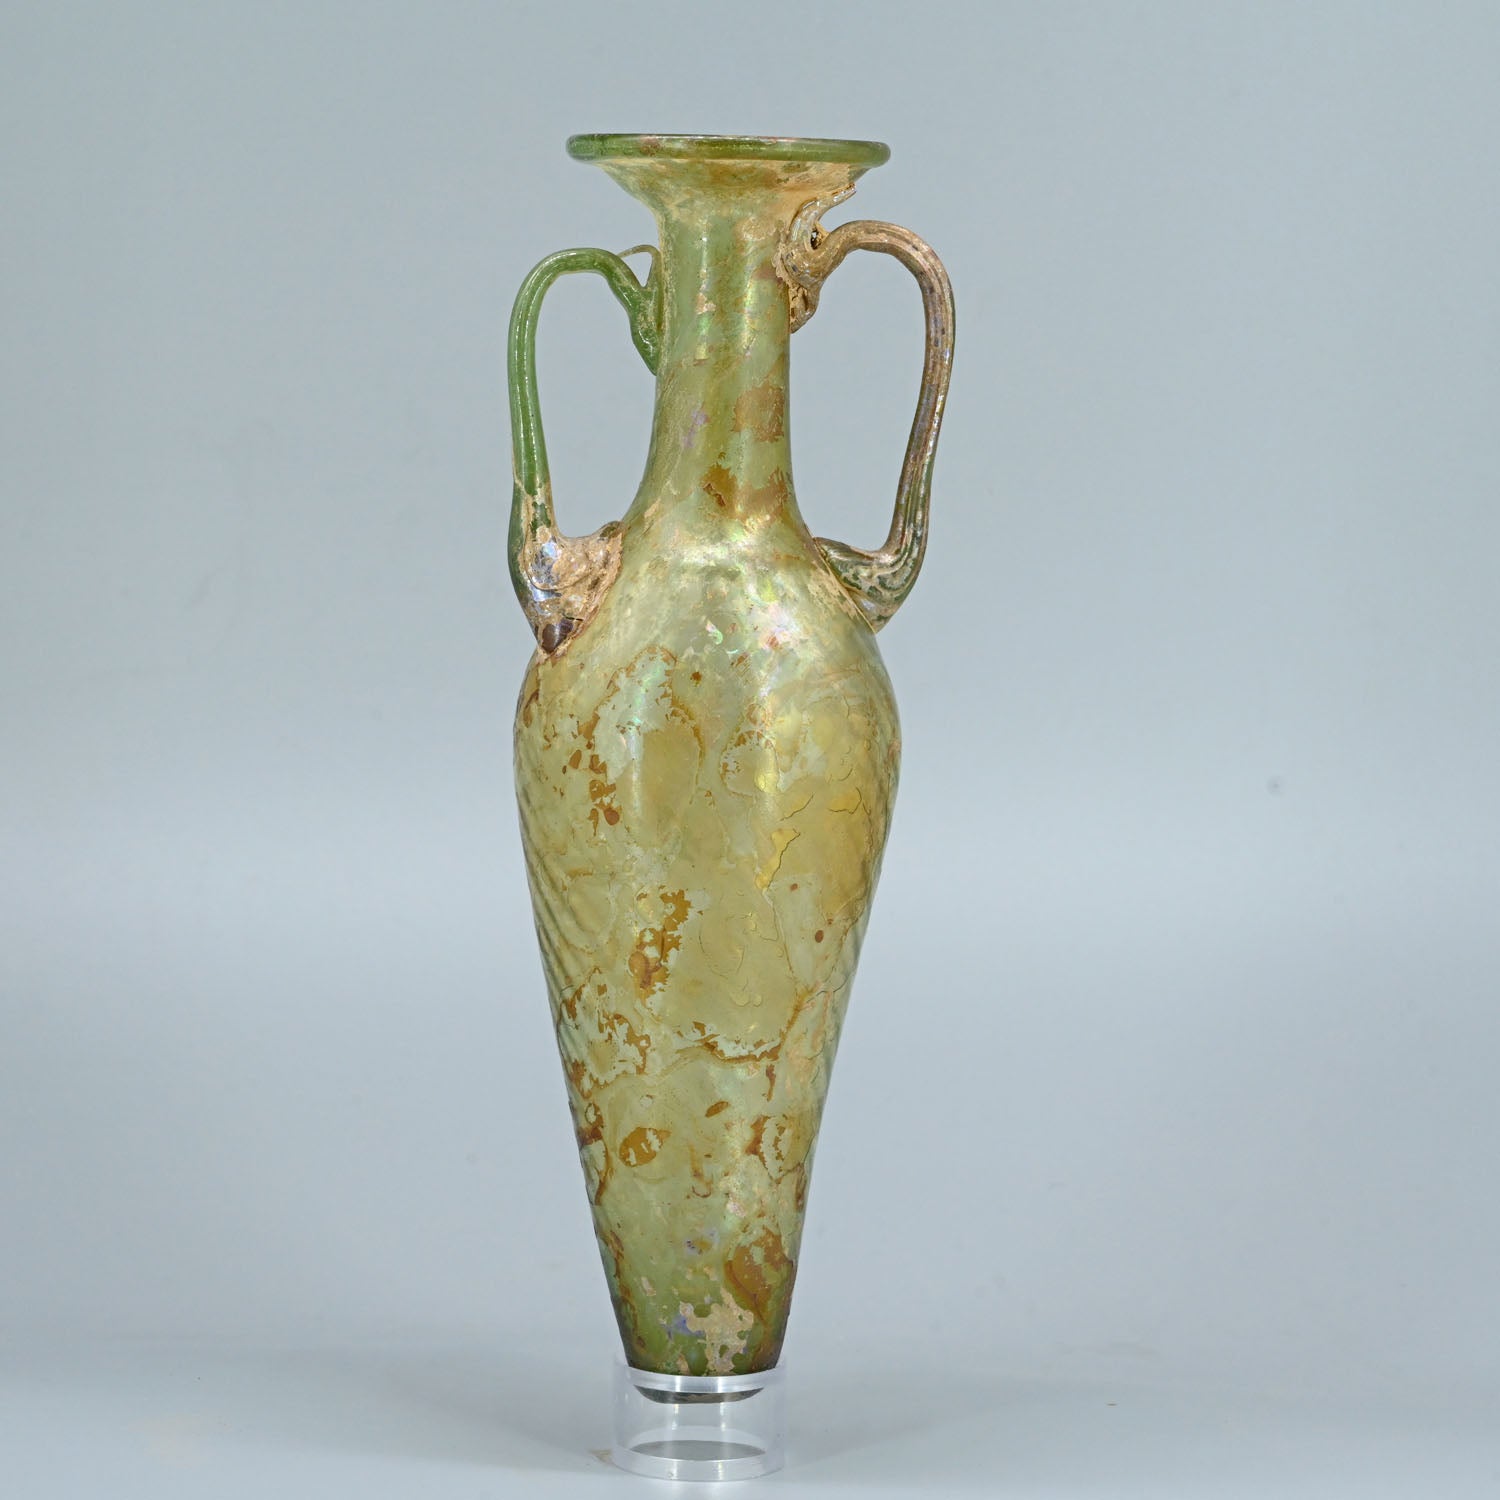 A large Byzantine Glass Flask, ca. 4th - 5th century CE